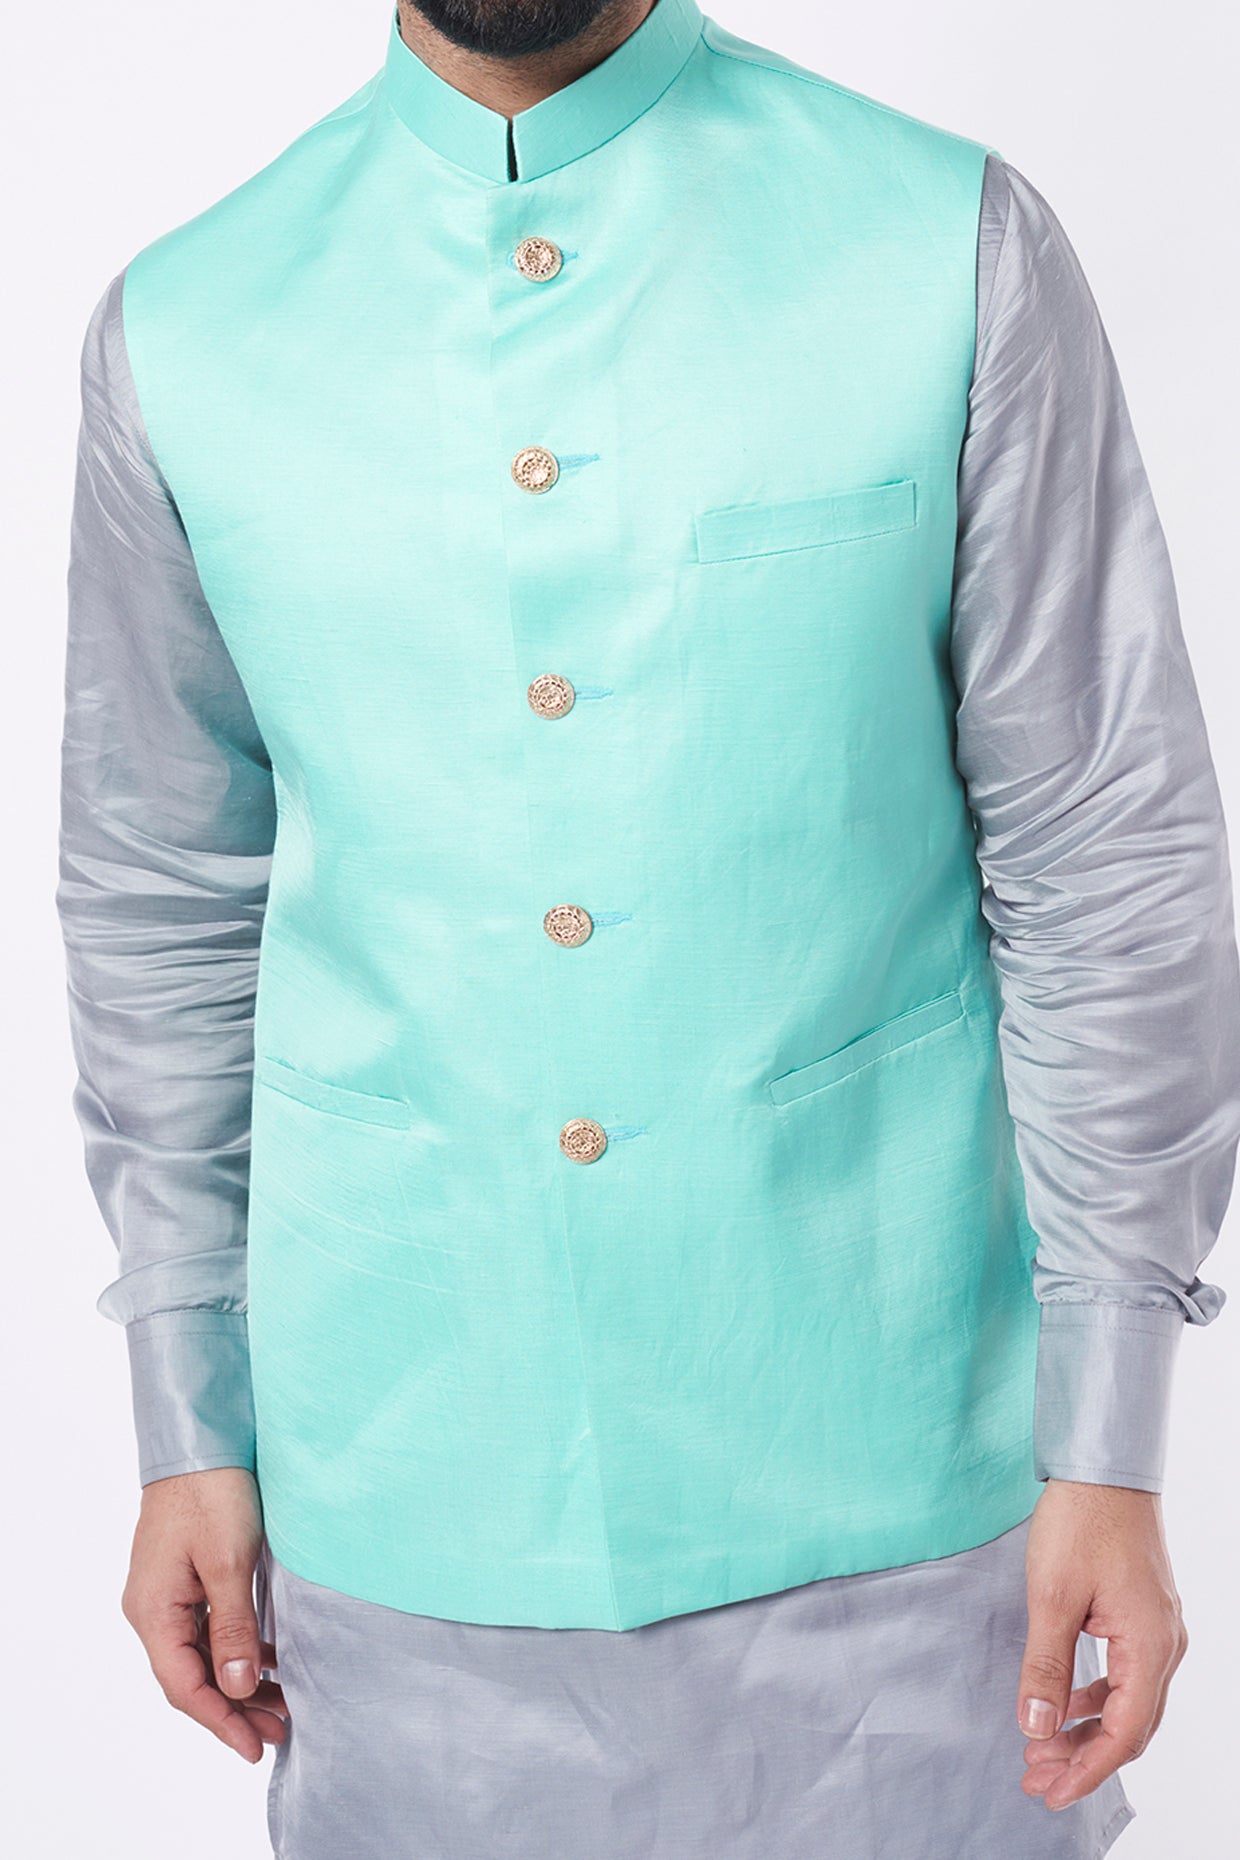 Top 15 Men's Nehru Jacket Colour Combinations & Styles for 2019 | by Ulama  Fashion Blog | Medium